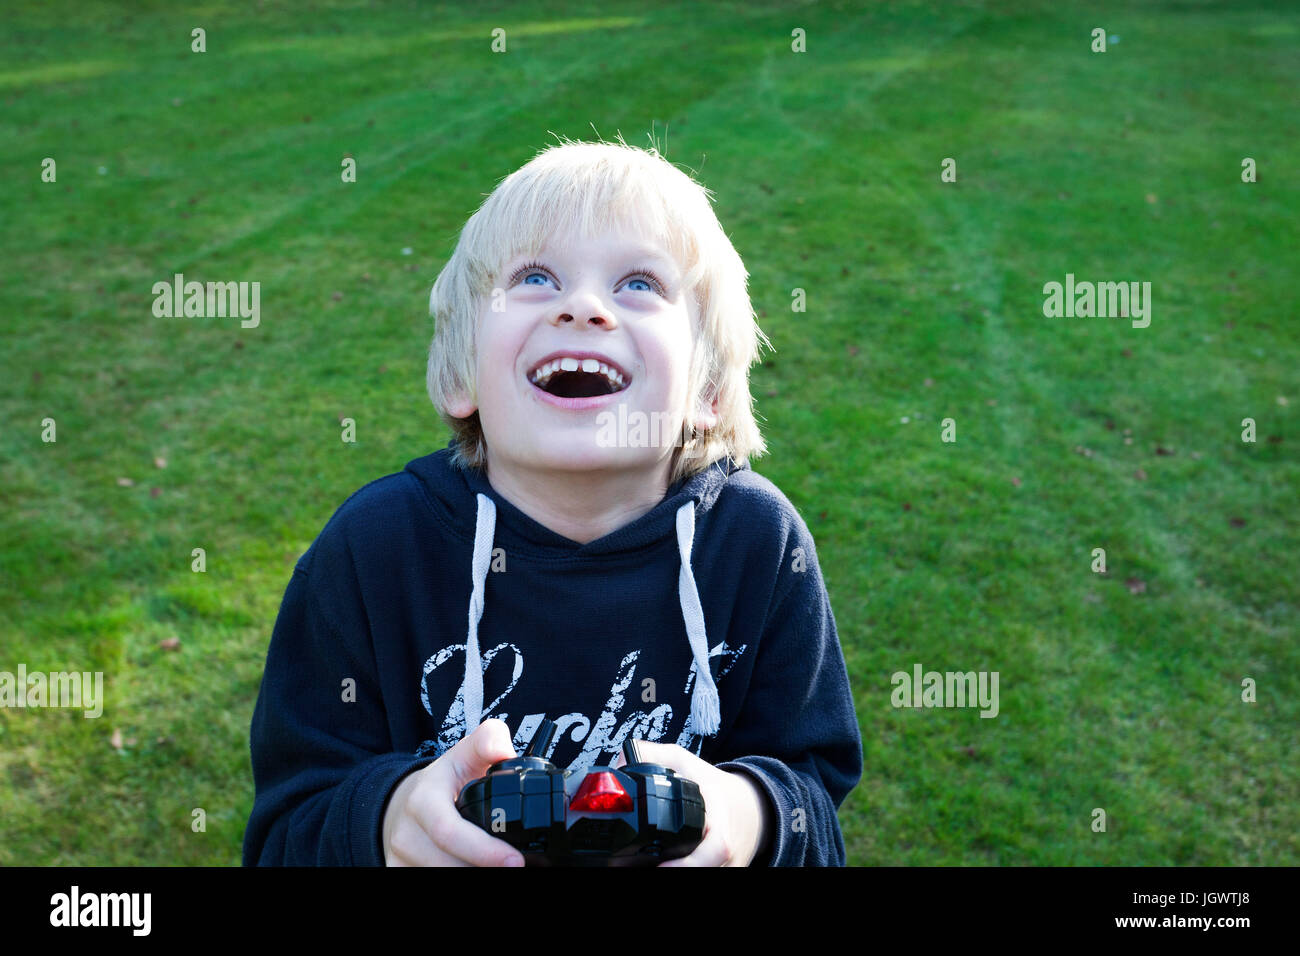 Boy holding remote control looking up smiling Stock Photo